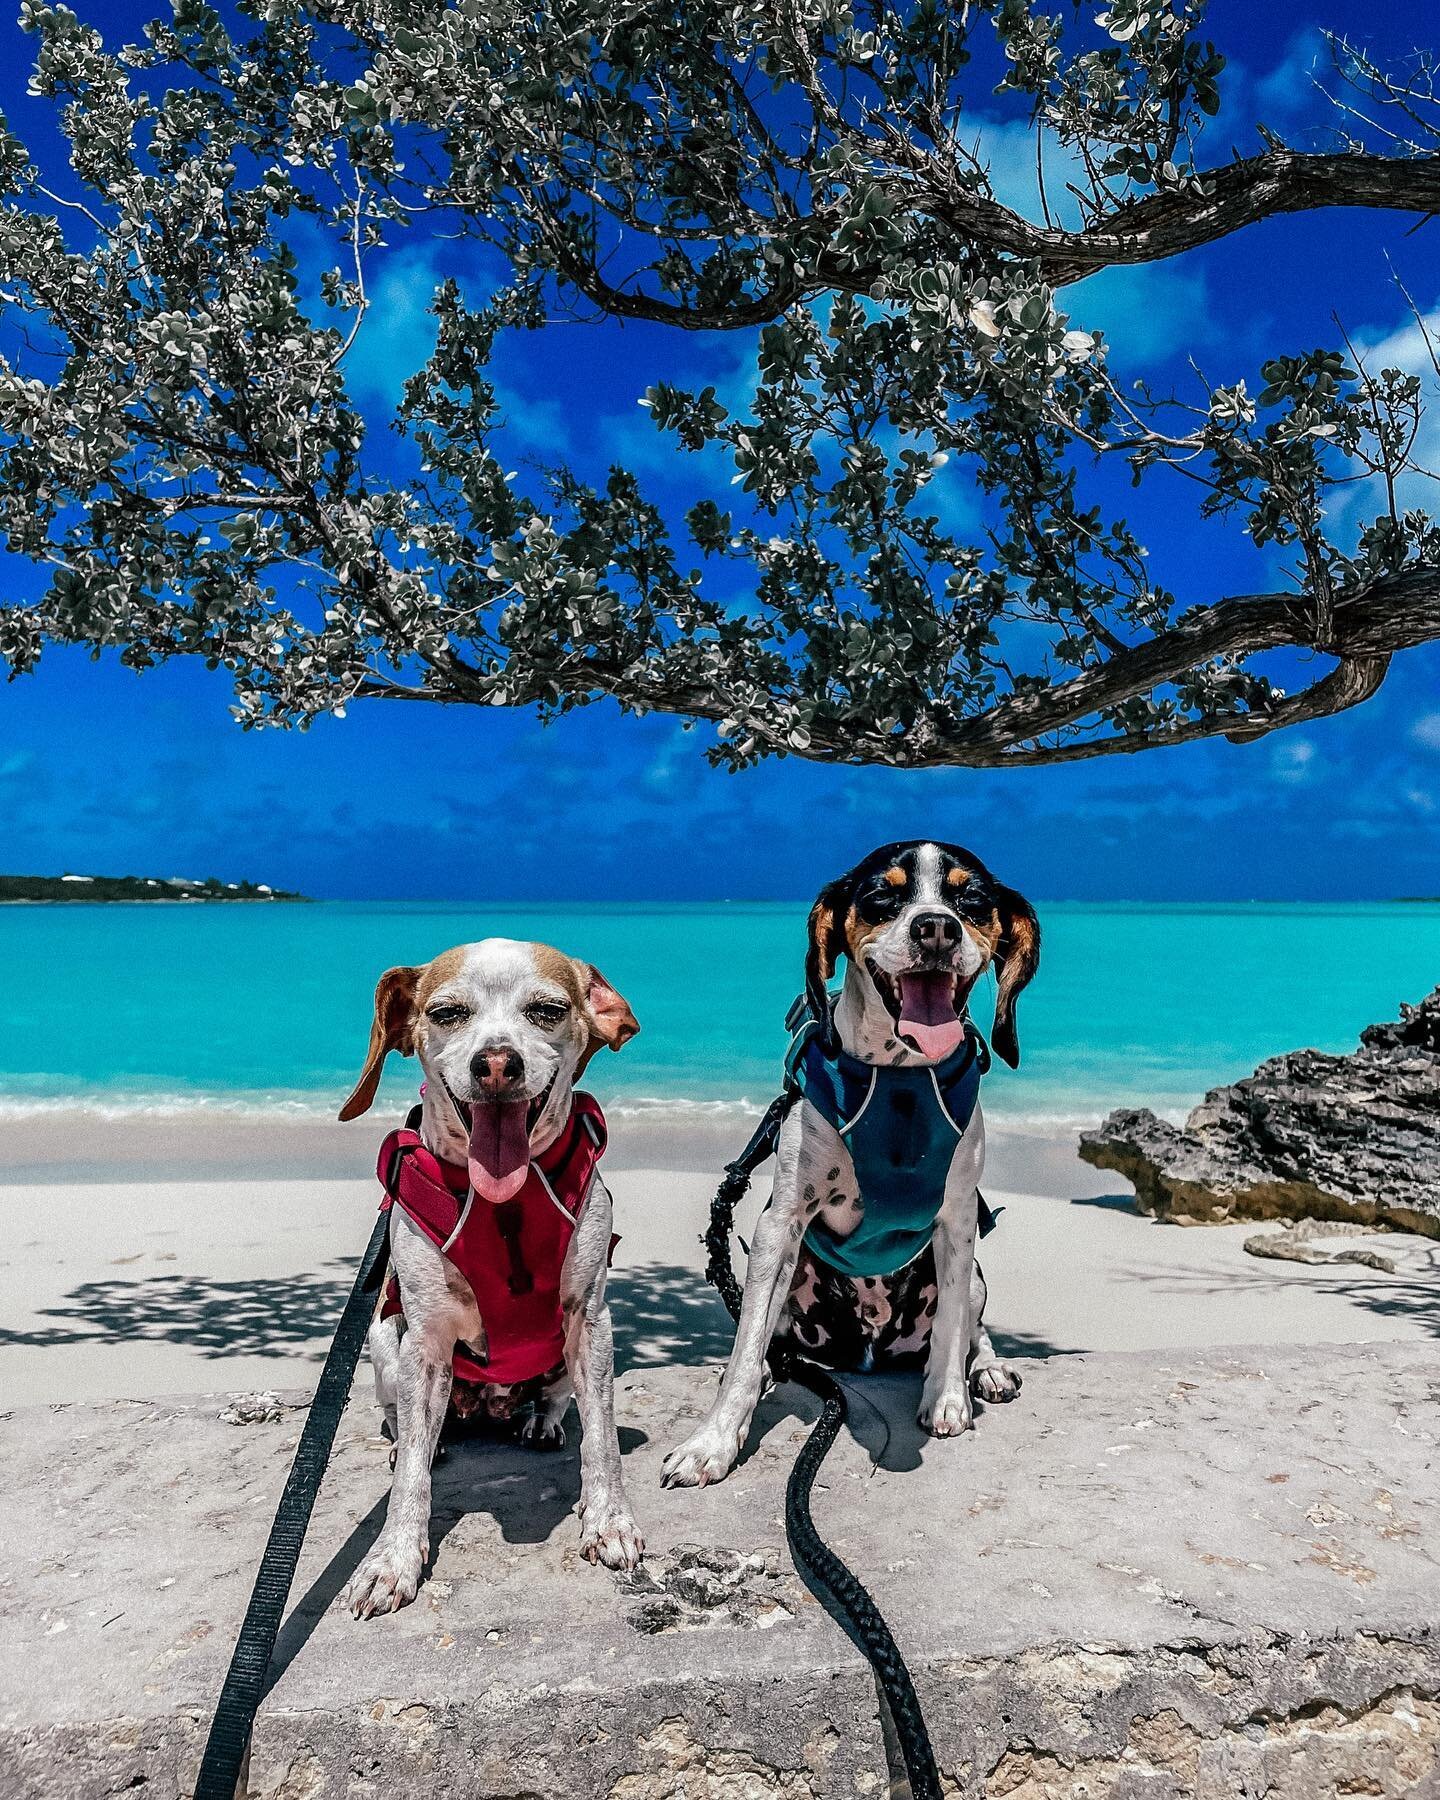 Happy dogs happy life, that&rsquo;s how the saying goes right? Well they sure are, unlimited beach walks and dingy rides how could any pup not be happy😁 
&bull;
&bull;
&bull;
&bull;
&bull;
#sailing #sailingdogs #beagles #happydogs #ofean #bahamas #C